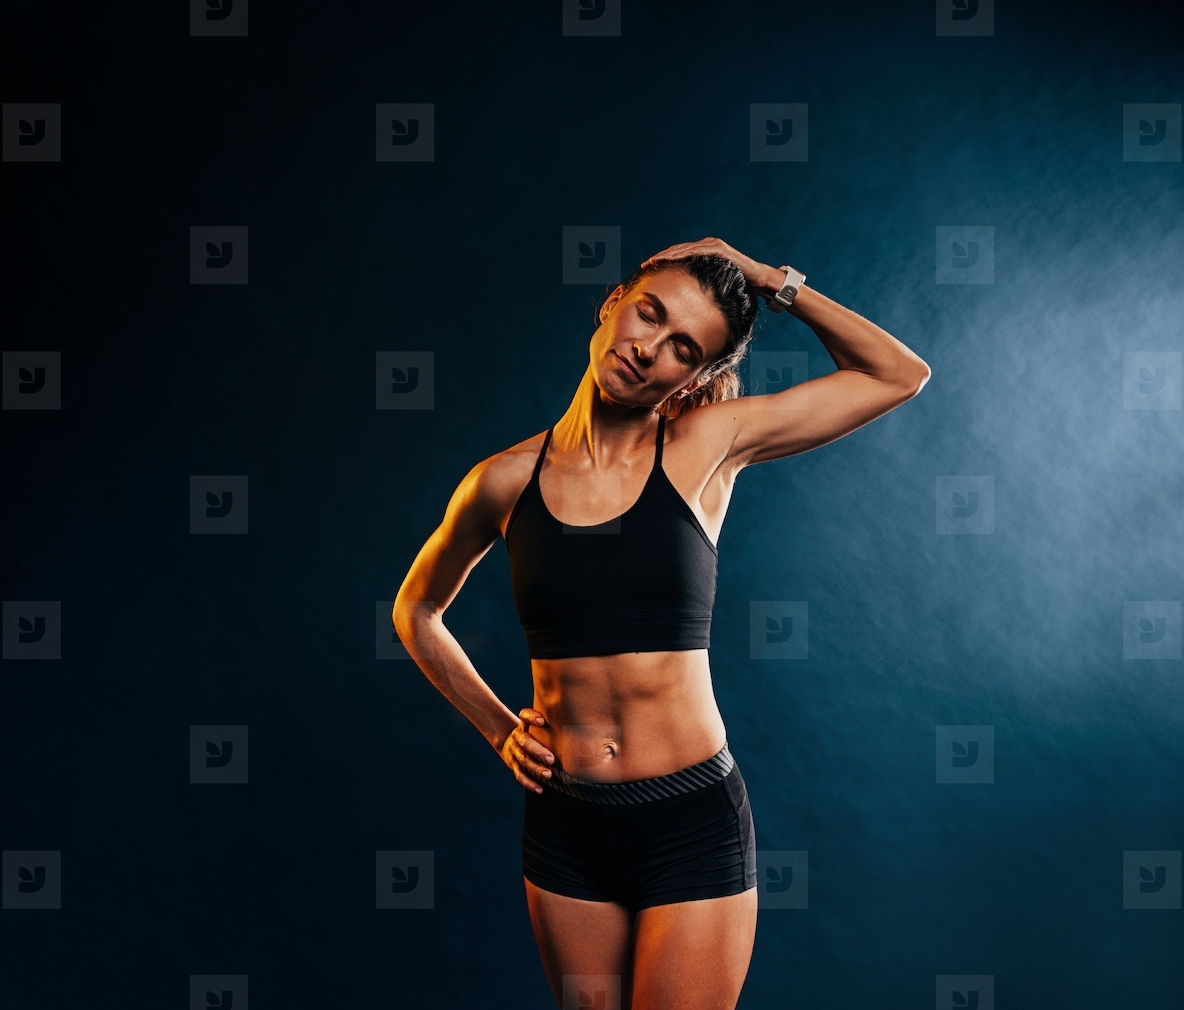 Young muscular woman warming up her neck before training against black background